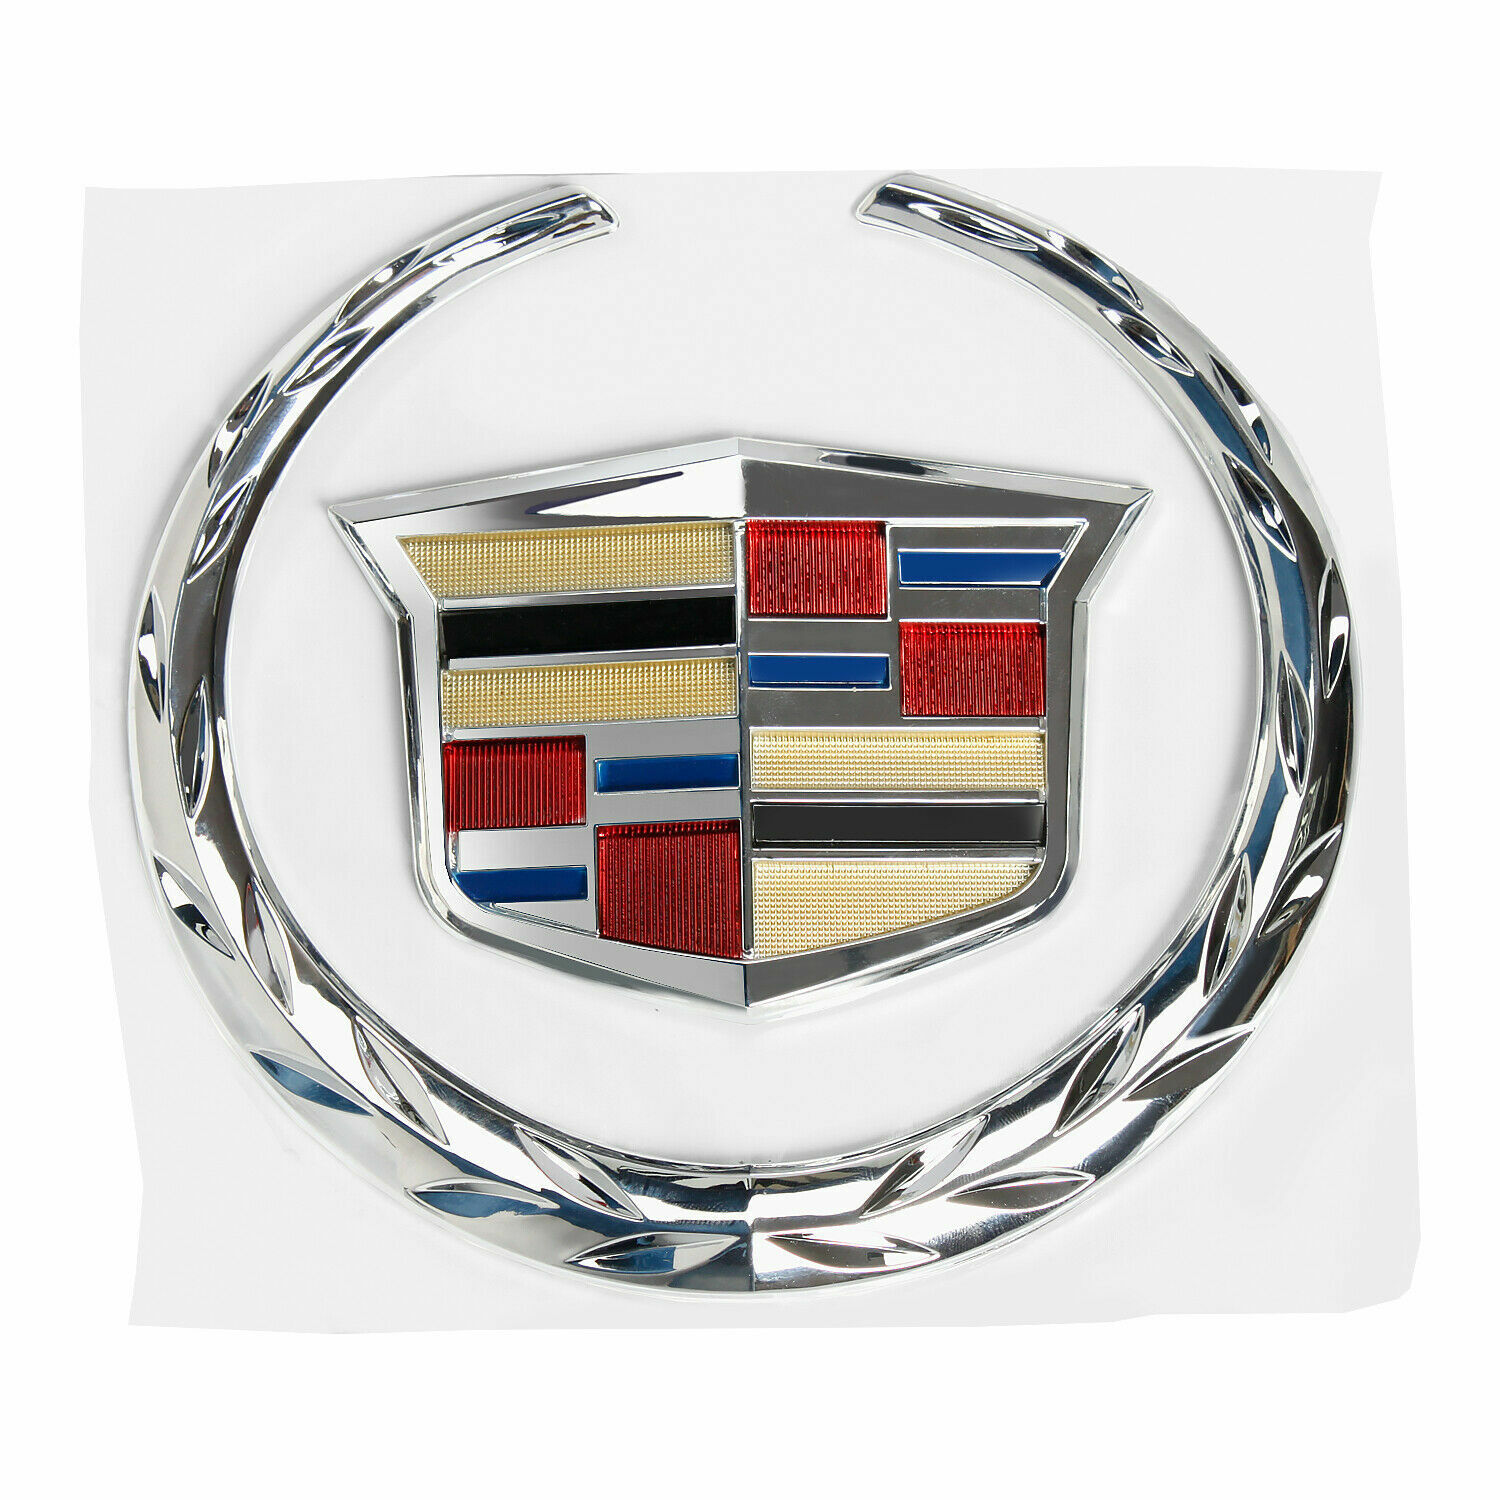 NEW For Cadillac Front Grille 6